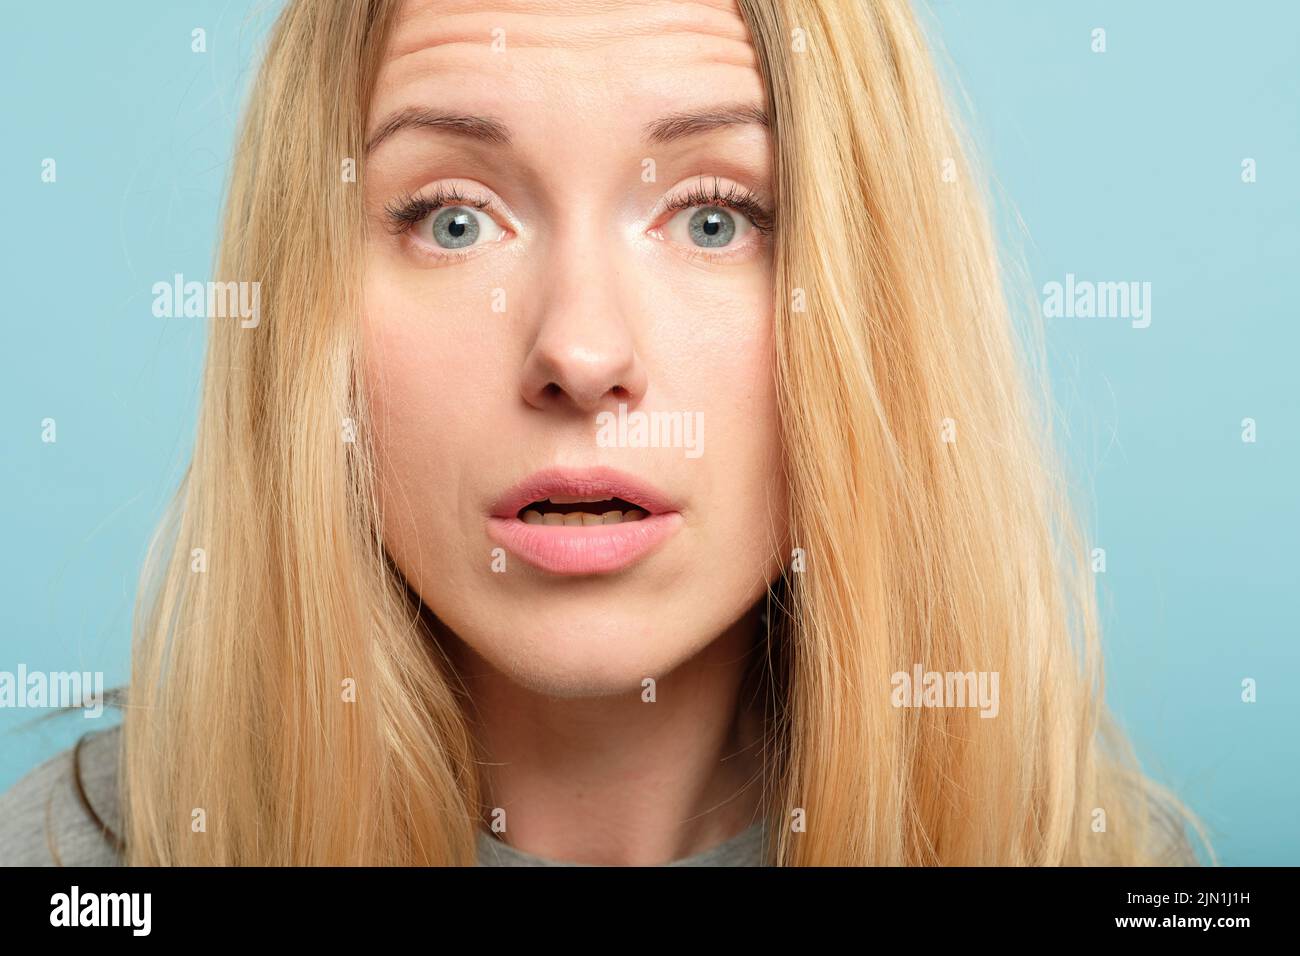 startled surprised woman emotion facial expression Stock Photo